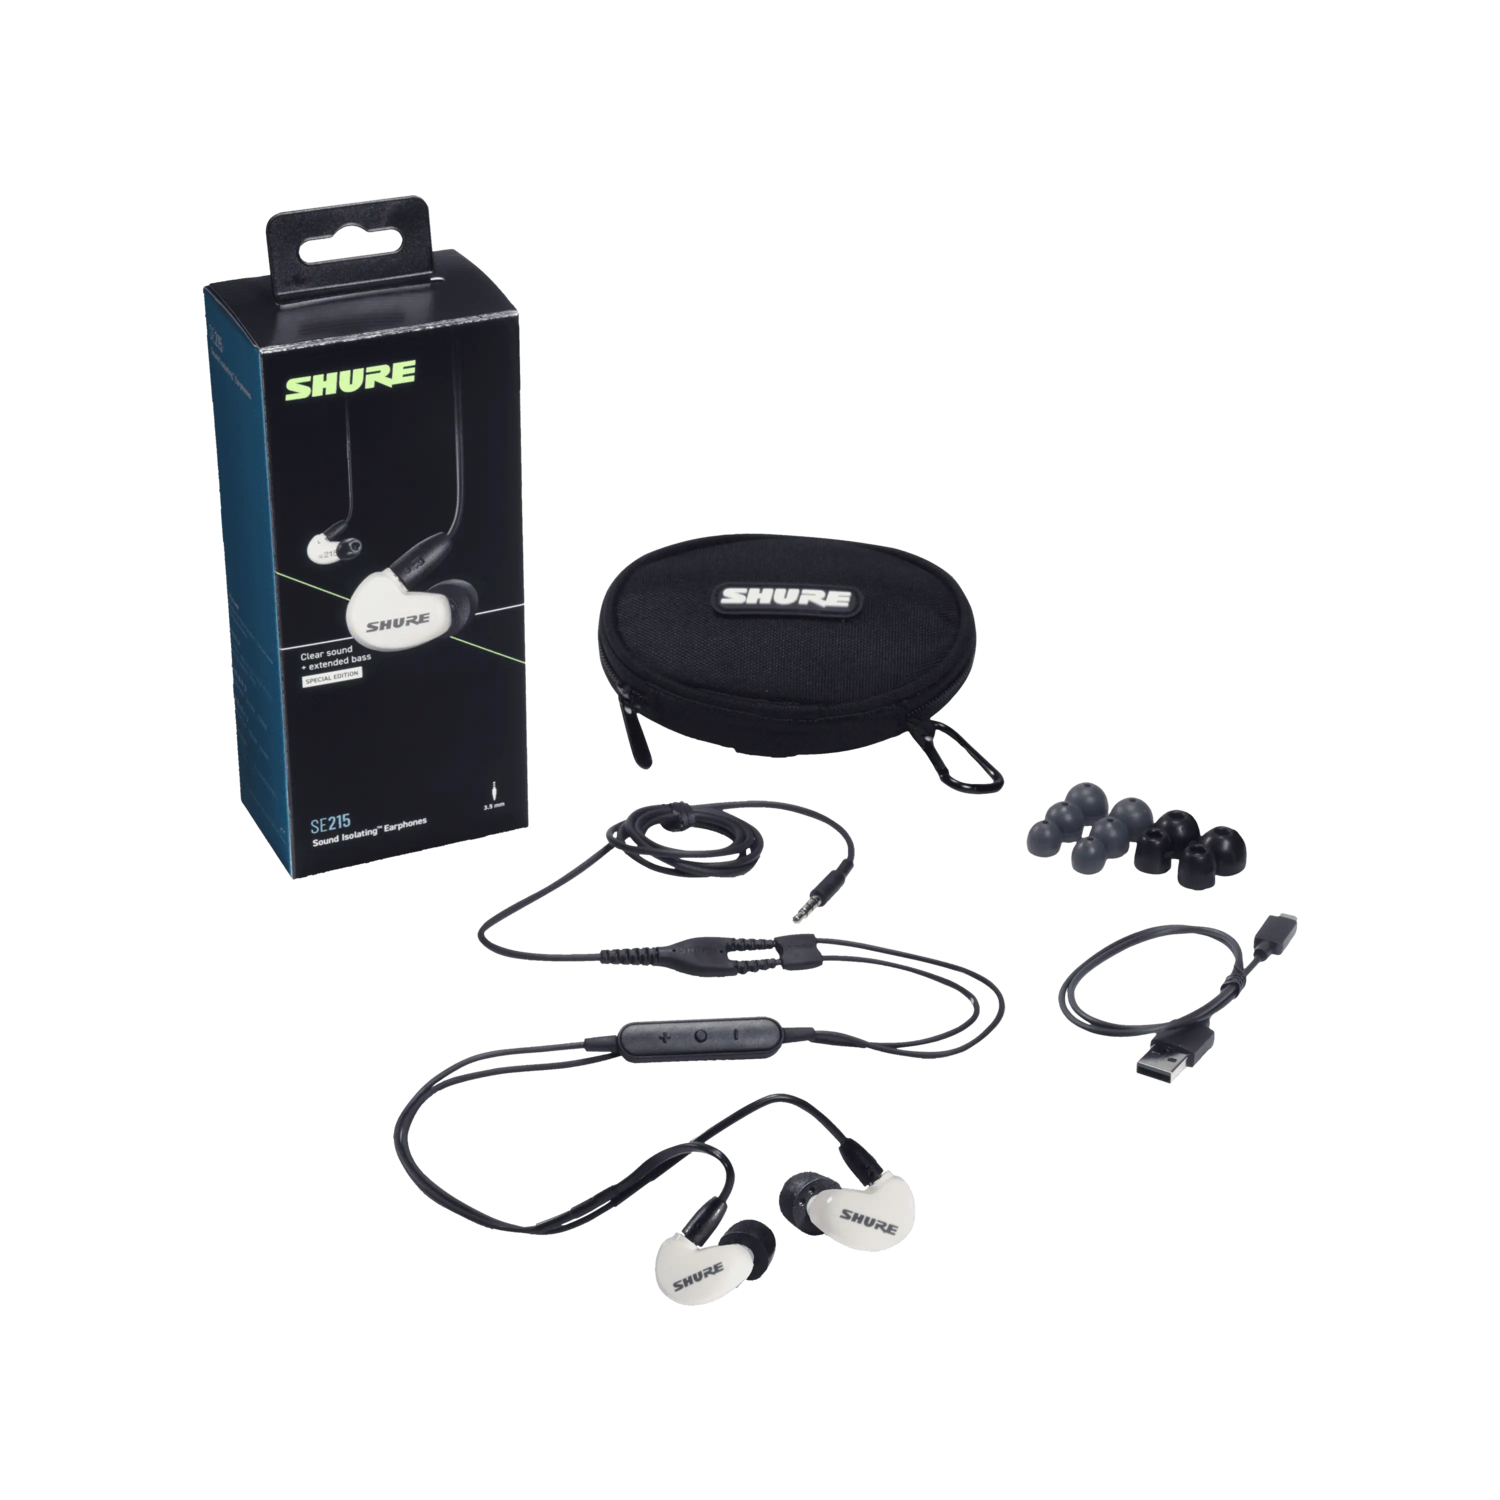 Shure SE215 Pro SE Sound-Isolating Earphones with Detachable Cable,Green  w/Black SE215SPE-GN